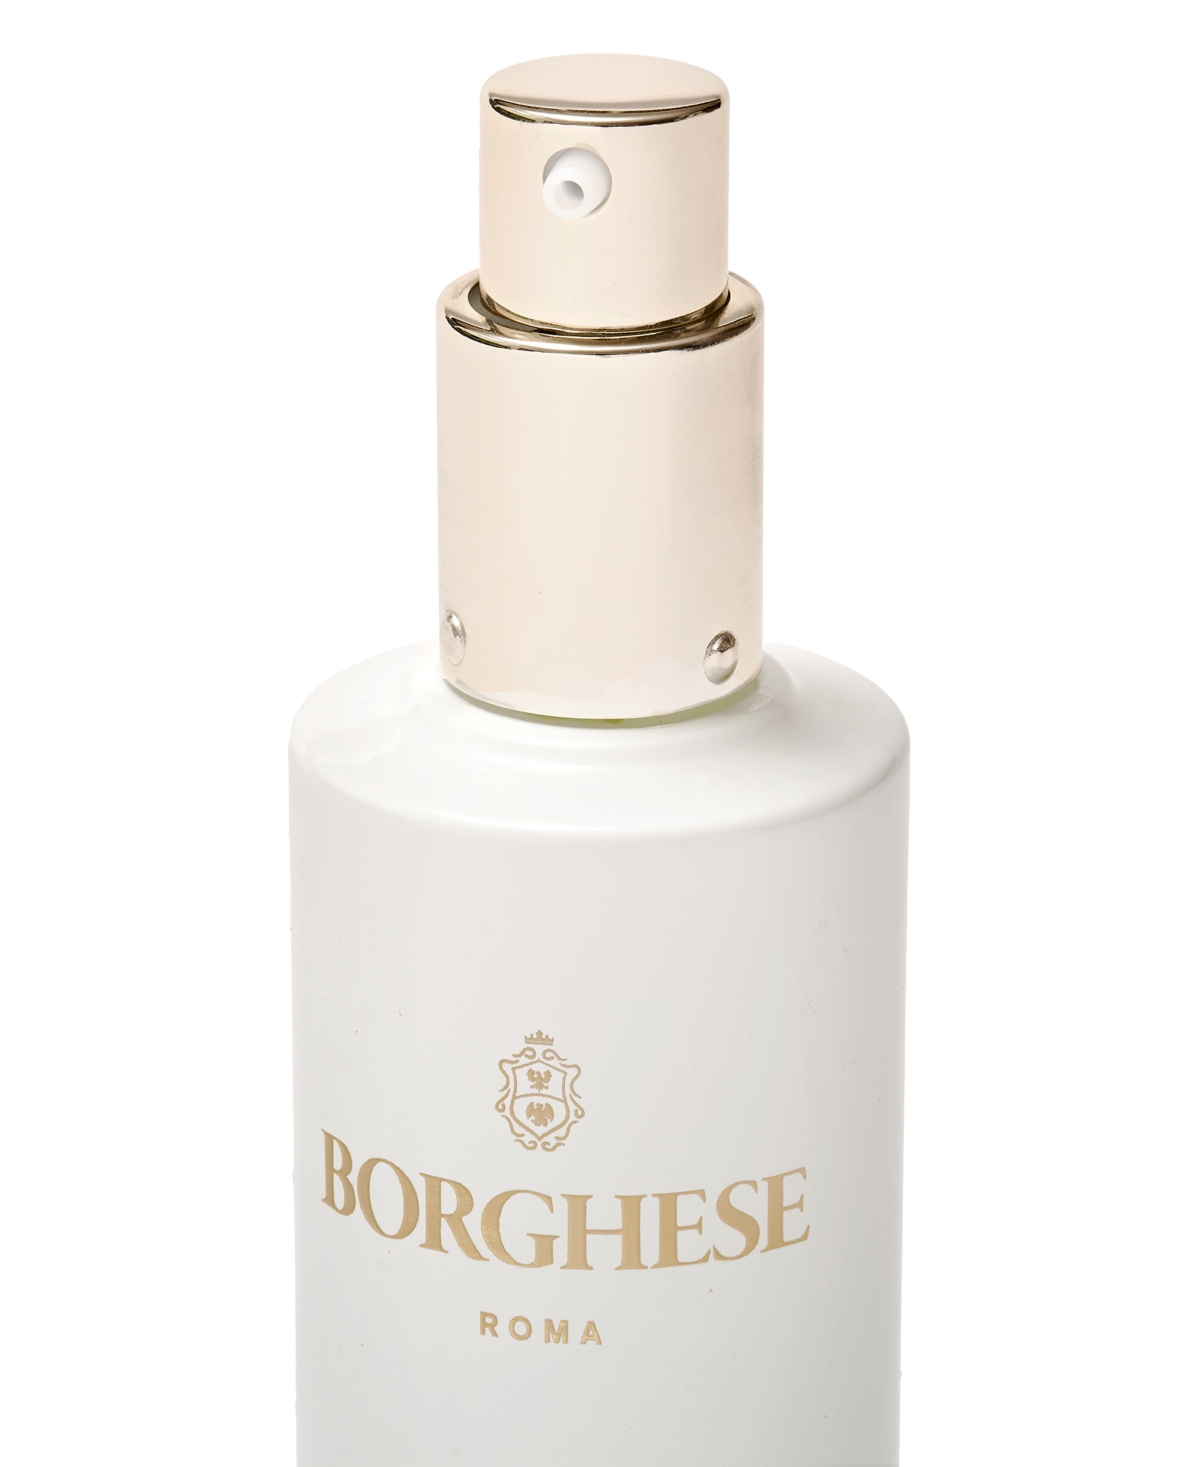 Shop Borghese Overnight Resurfacing Mask With Aha & Bha In No Color